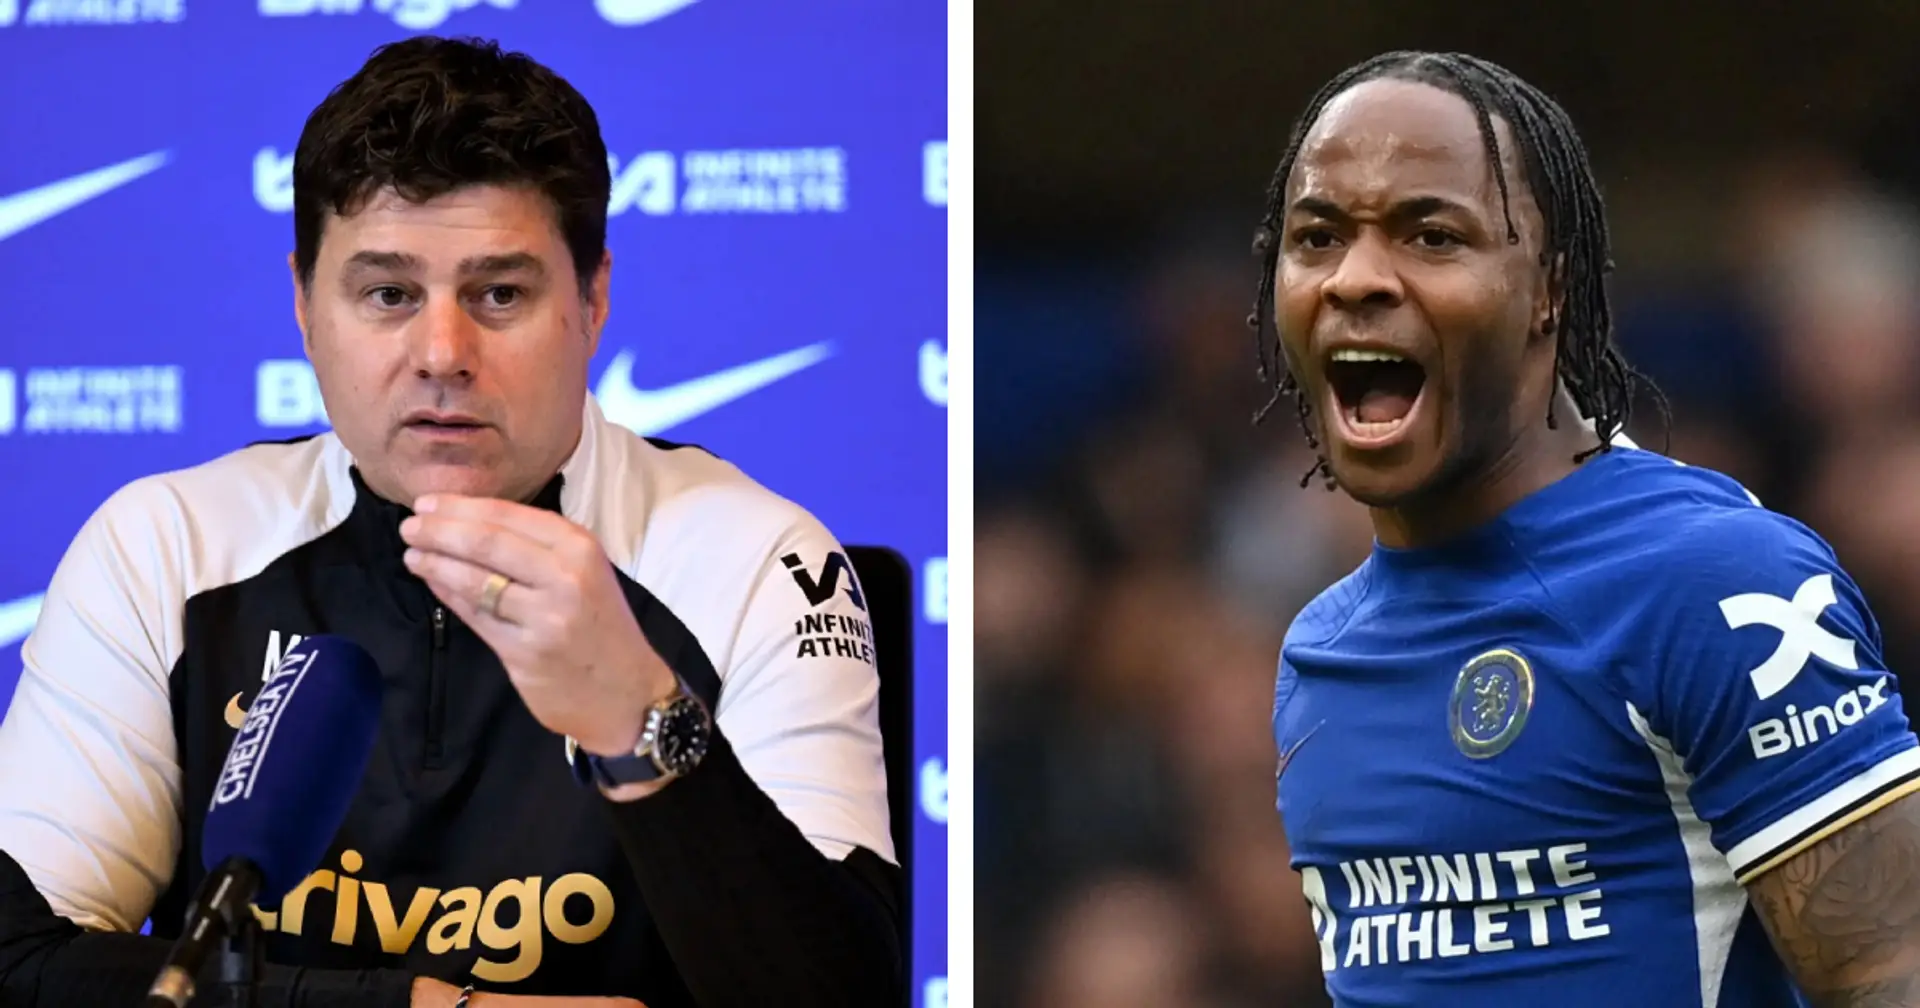 'We need to move on': Pochettino sends message to Sterling critics